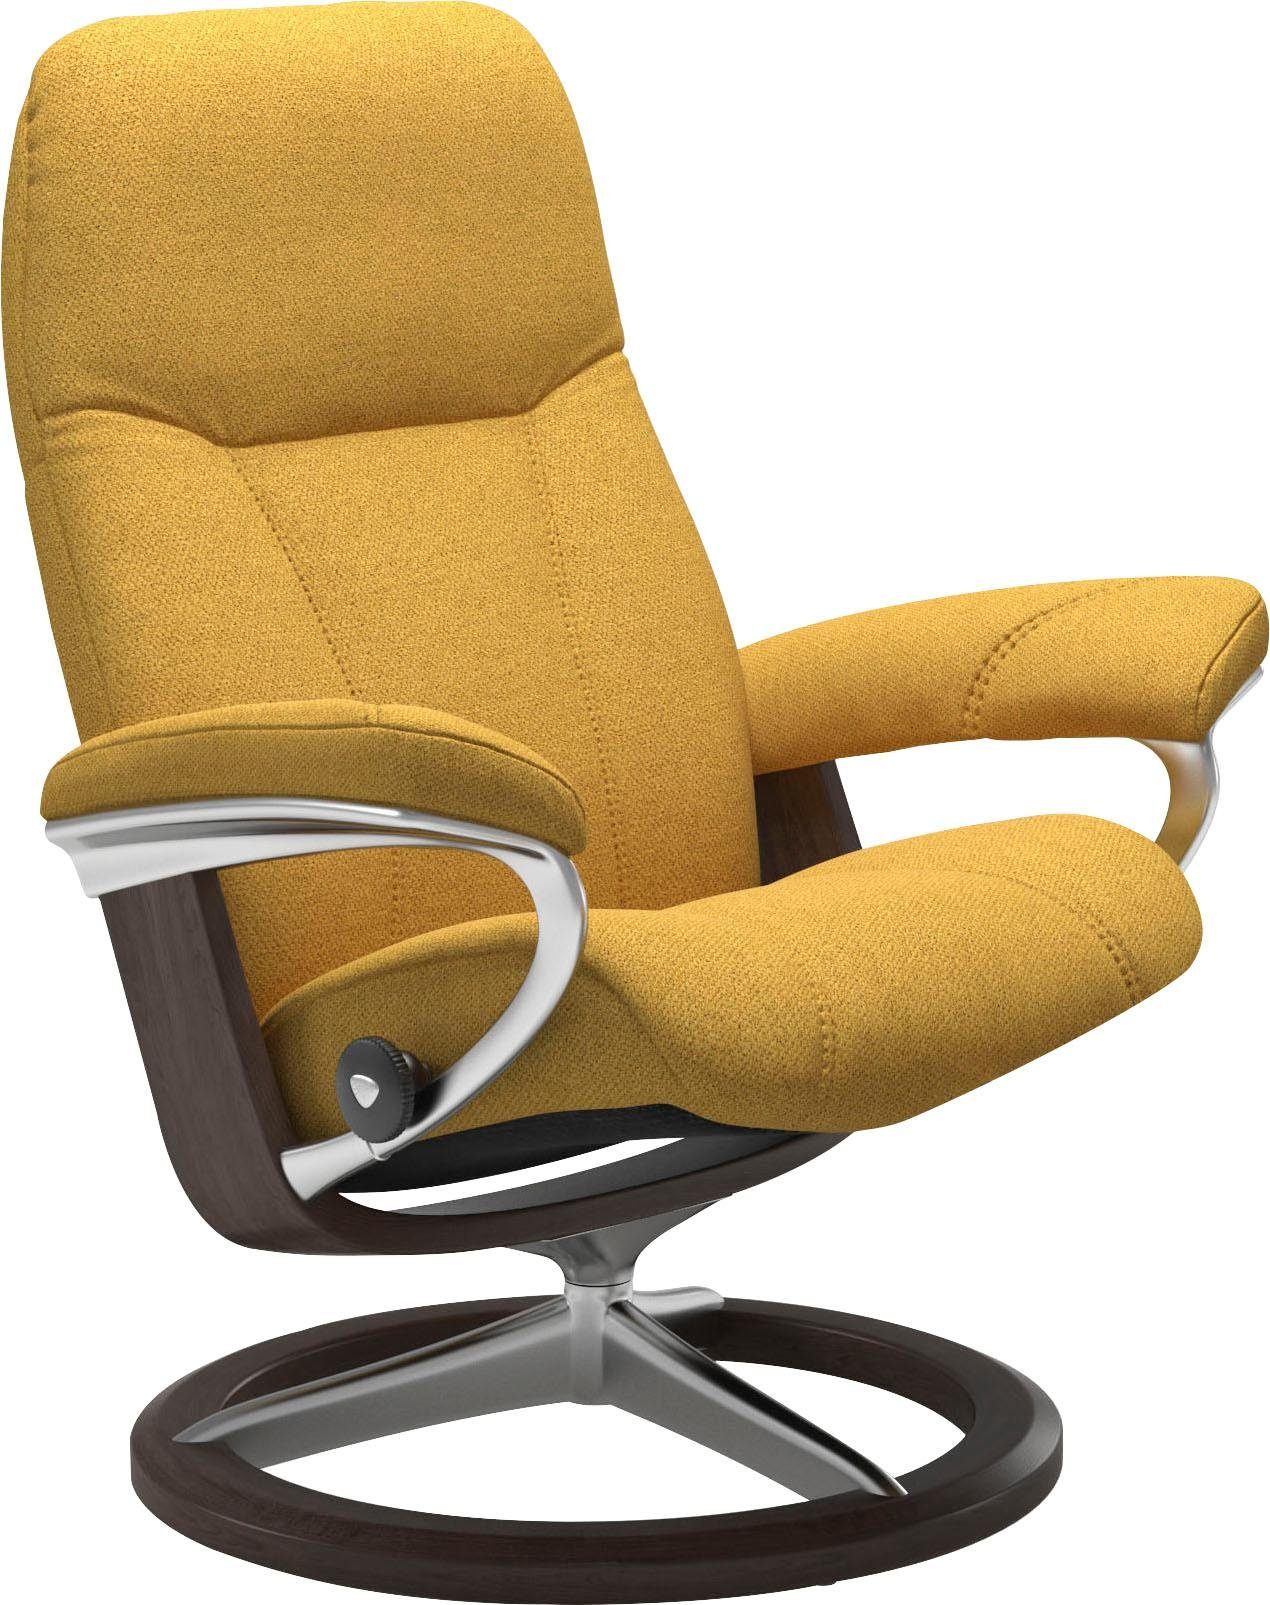 L, Gestell Signature mit Base, Größe Relaxsessel Wenge Consul, Stressless®